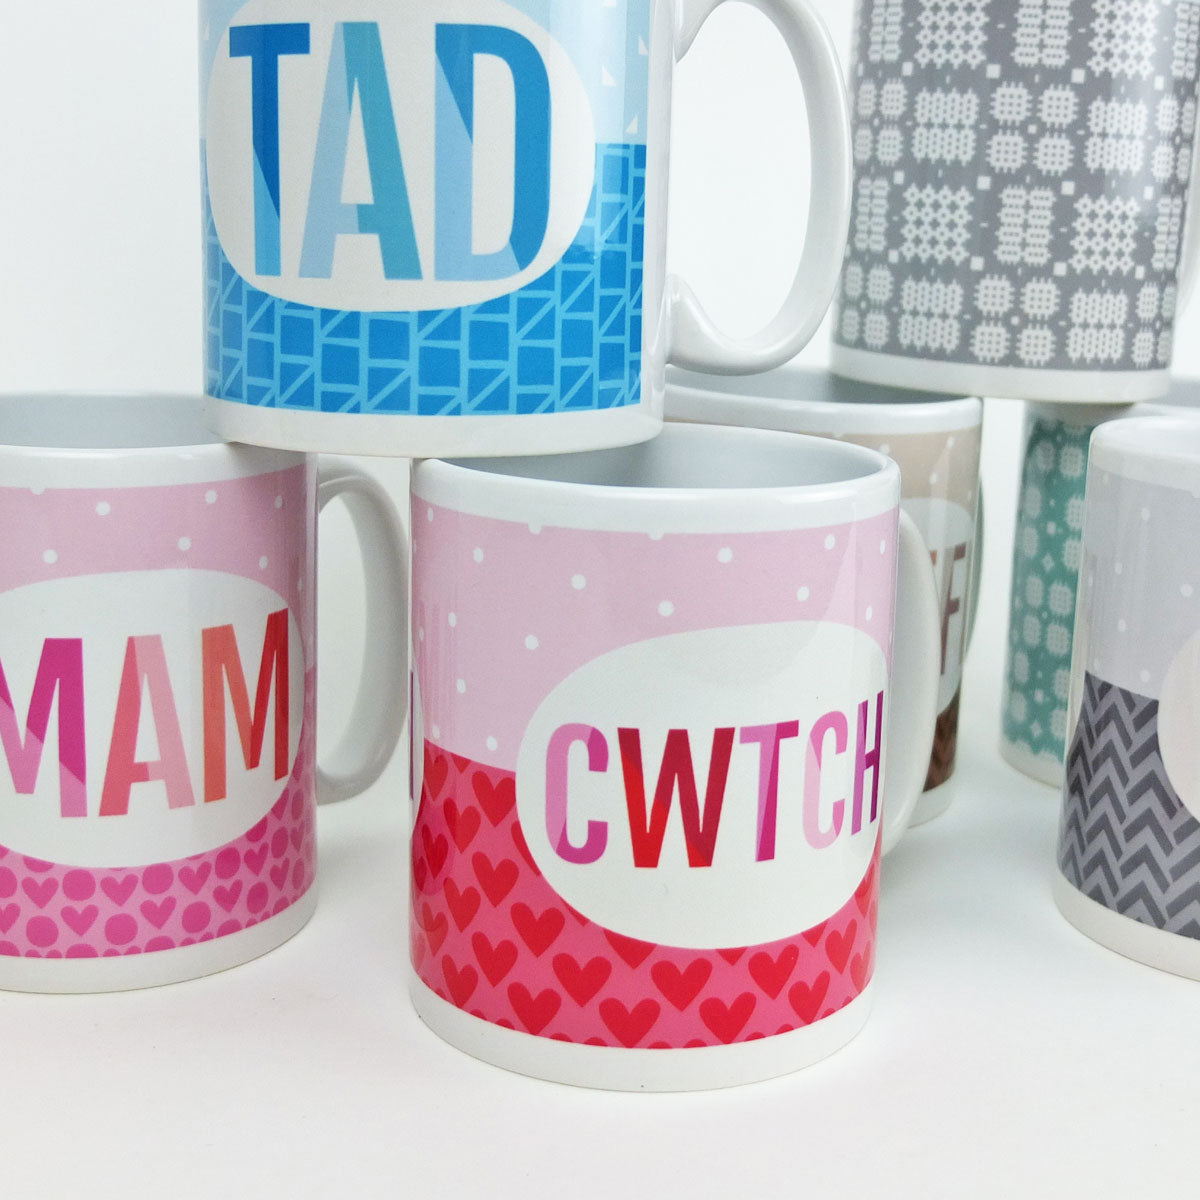 Cwtch Mug in Red and Pink